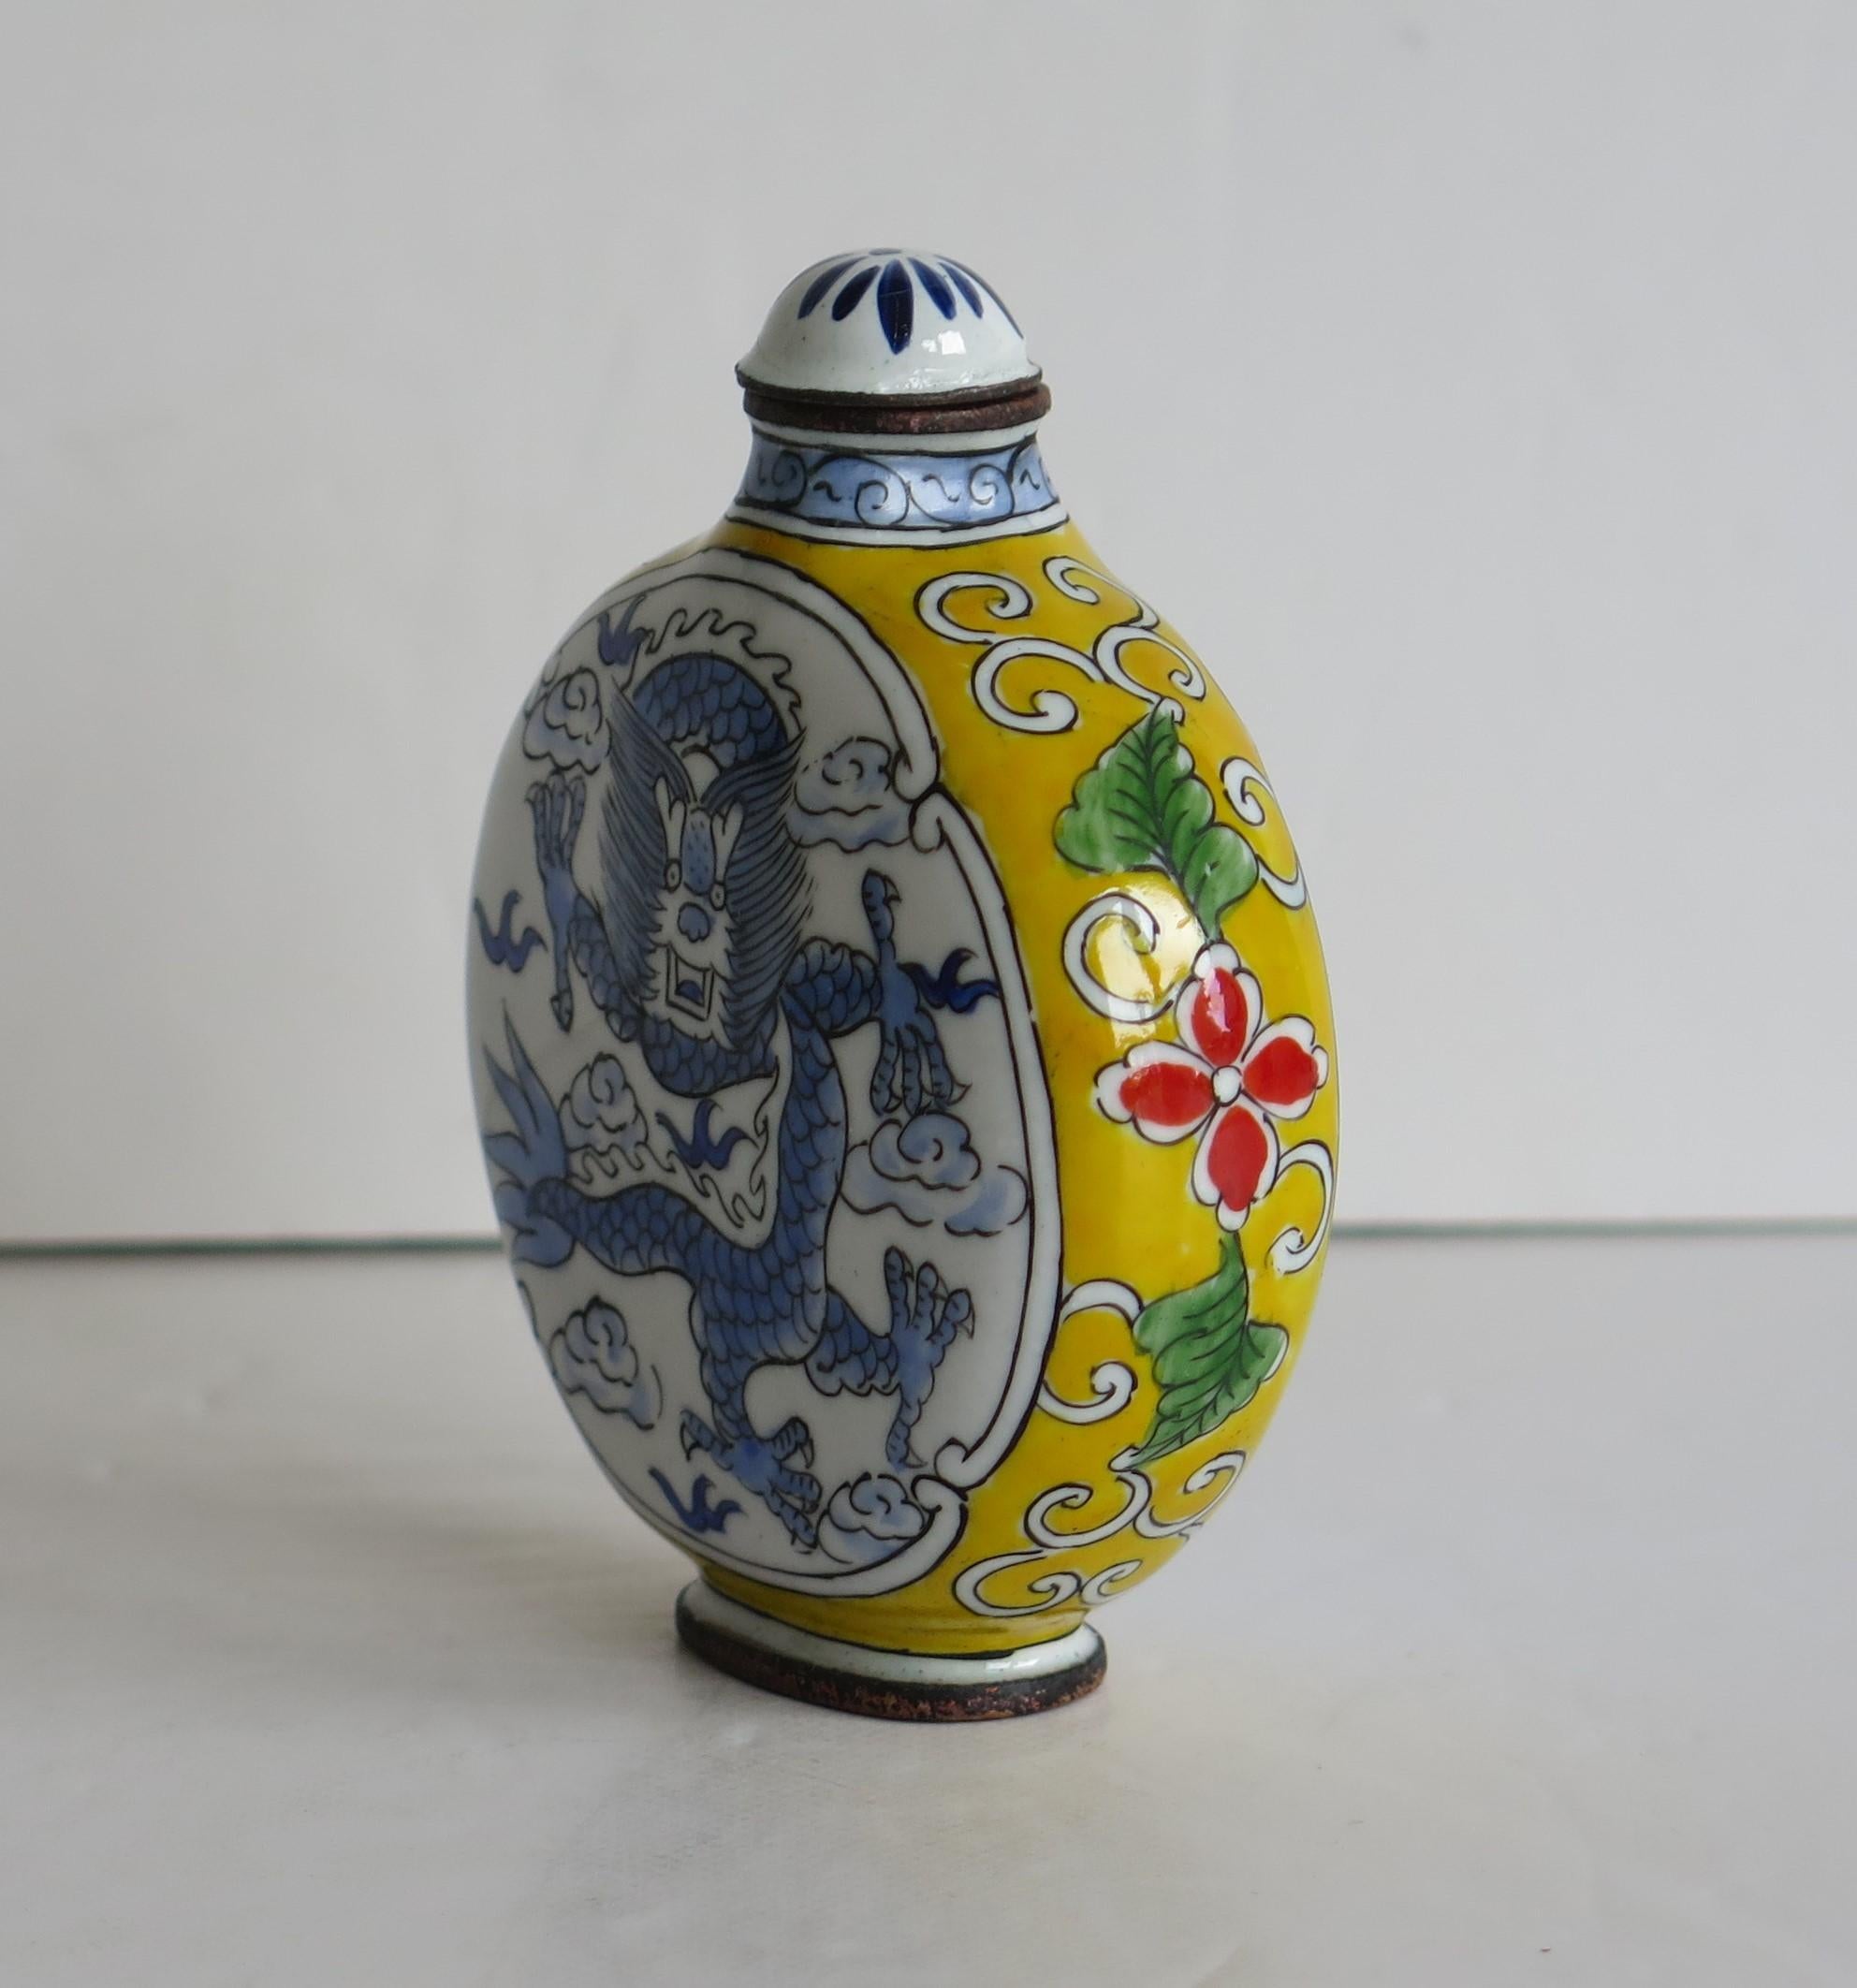 20th Century Chinese Snuff Bottle Hand Enamelled Dragon on Copper 4-Cha'r Mark, circa 1940s